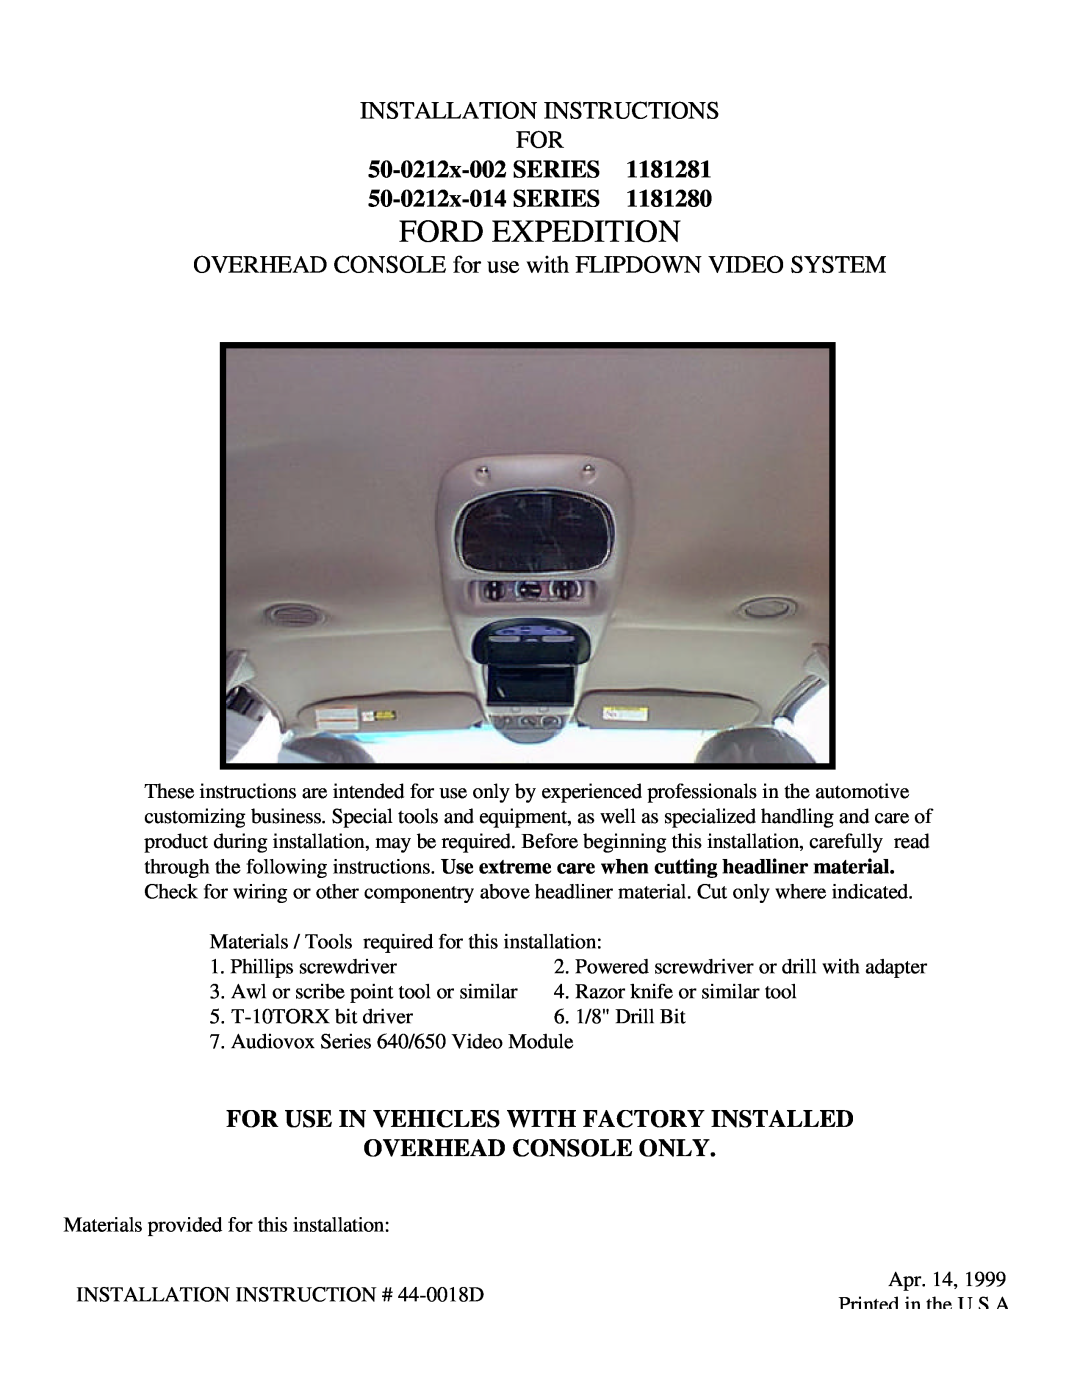 Carson Optical 1181281, 1181280 installation instructions Ford Expedition, Installation Instructions For 